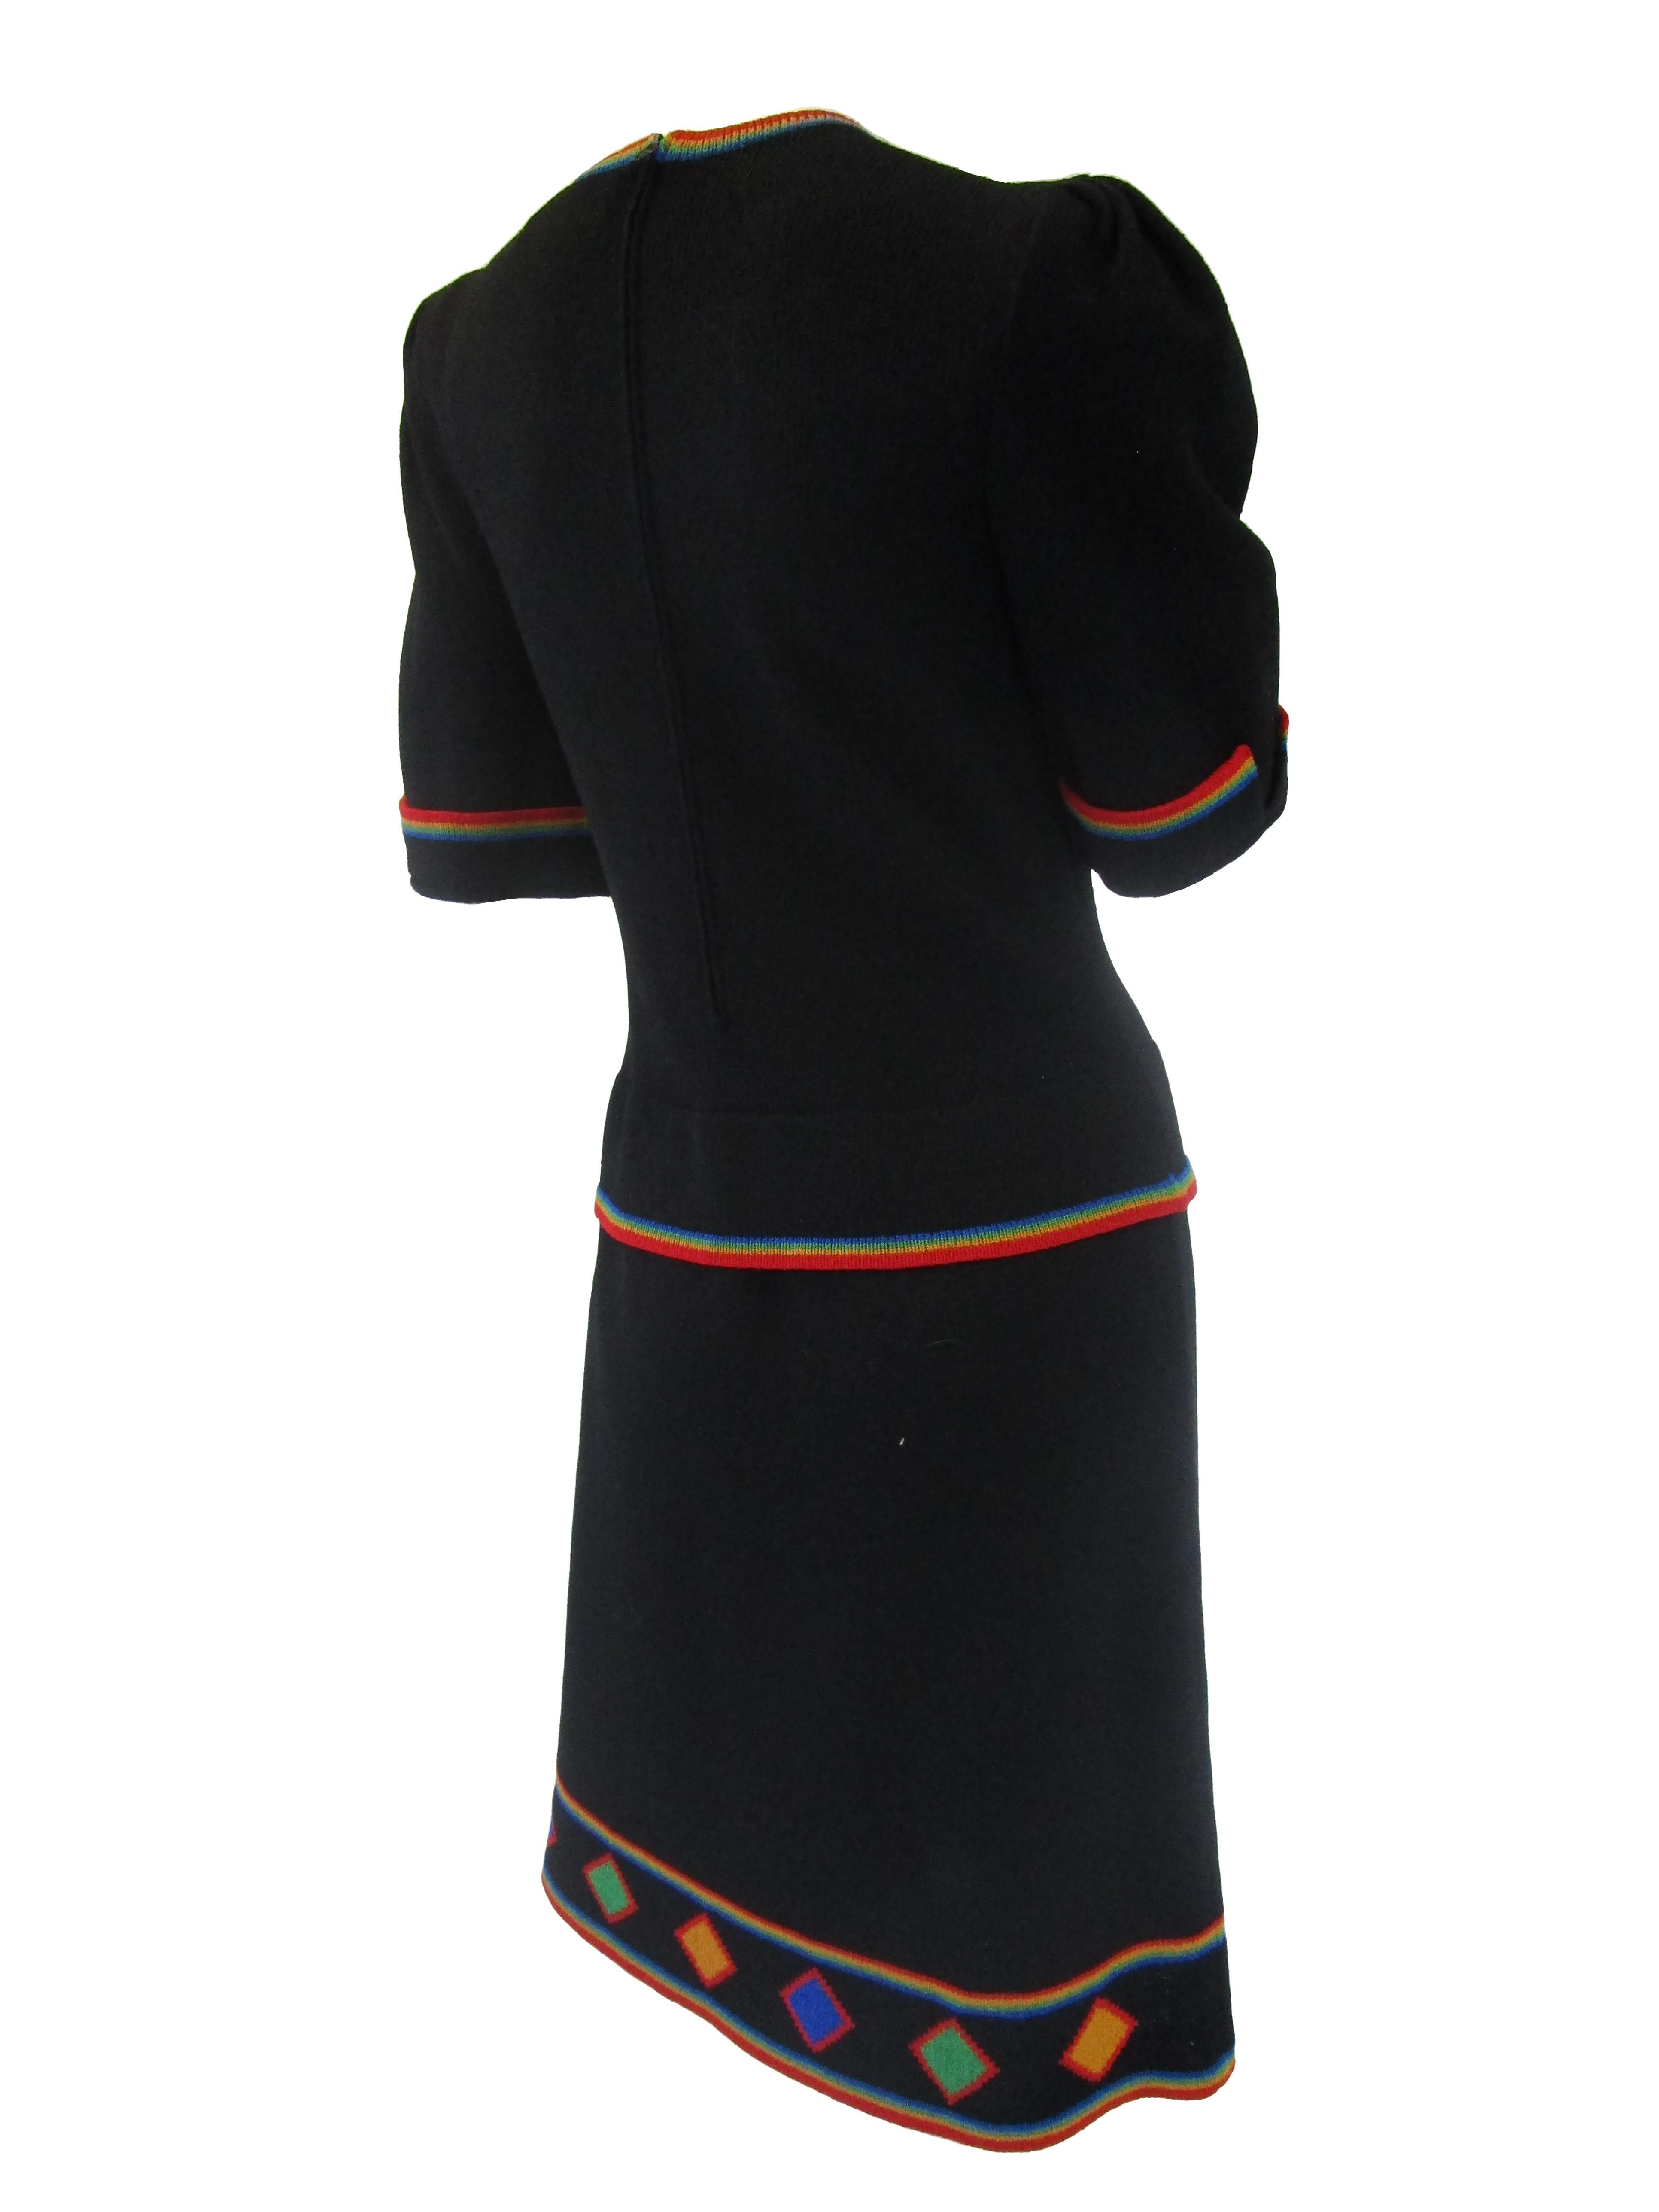 1970s Adolfo Black Knit Dress With Rainbow Details  For Sale 3